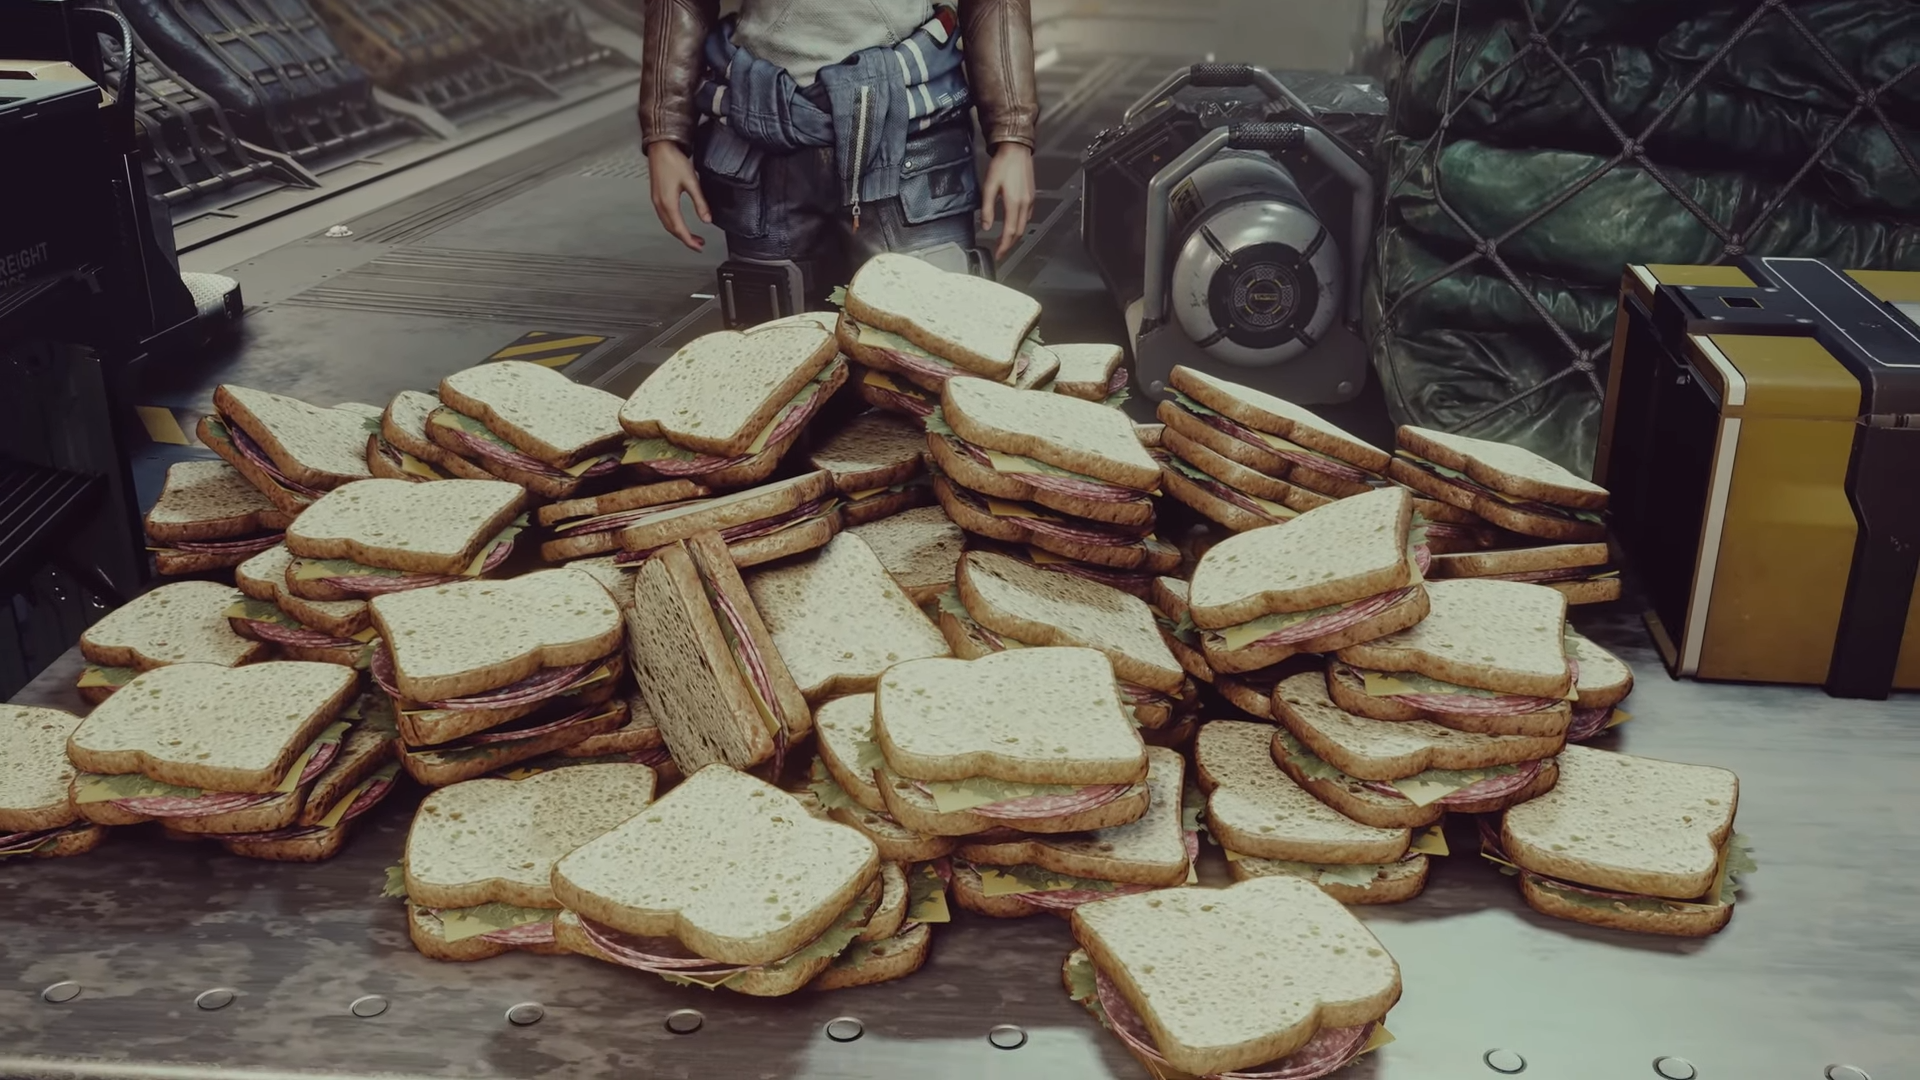 A pile of sandwiches